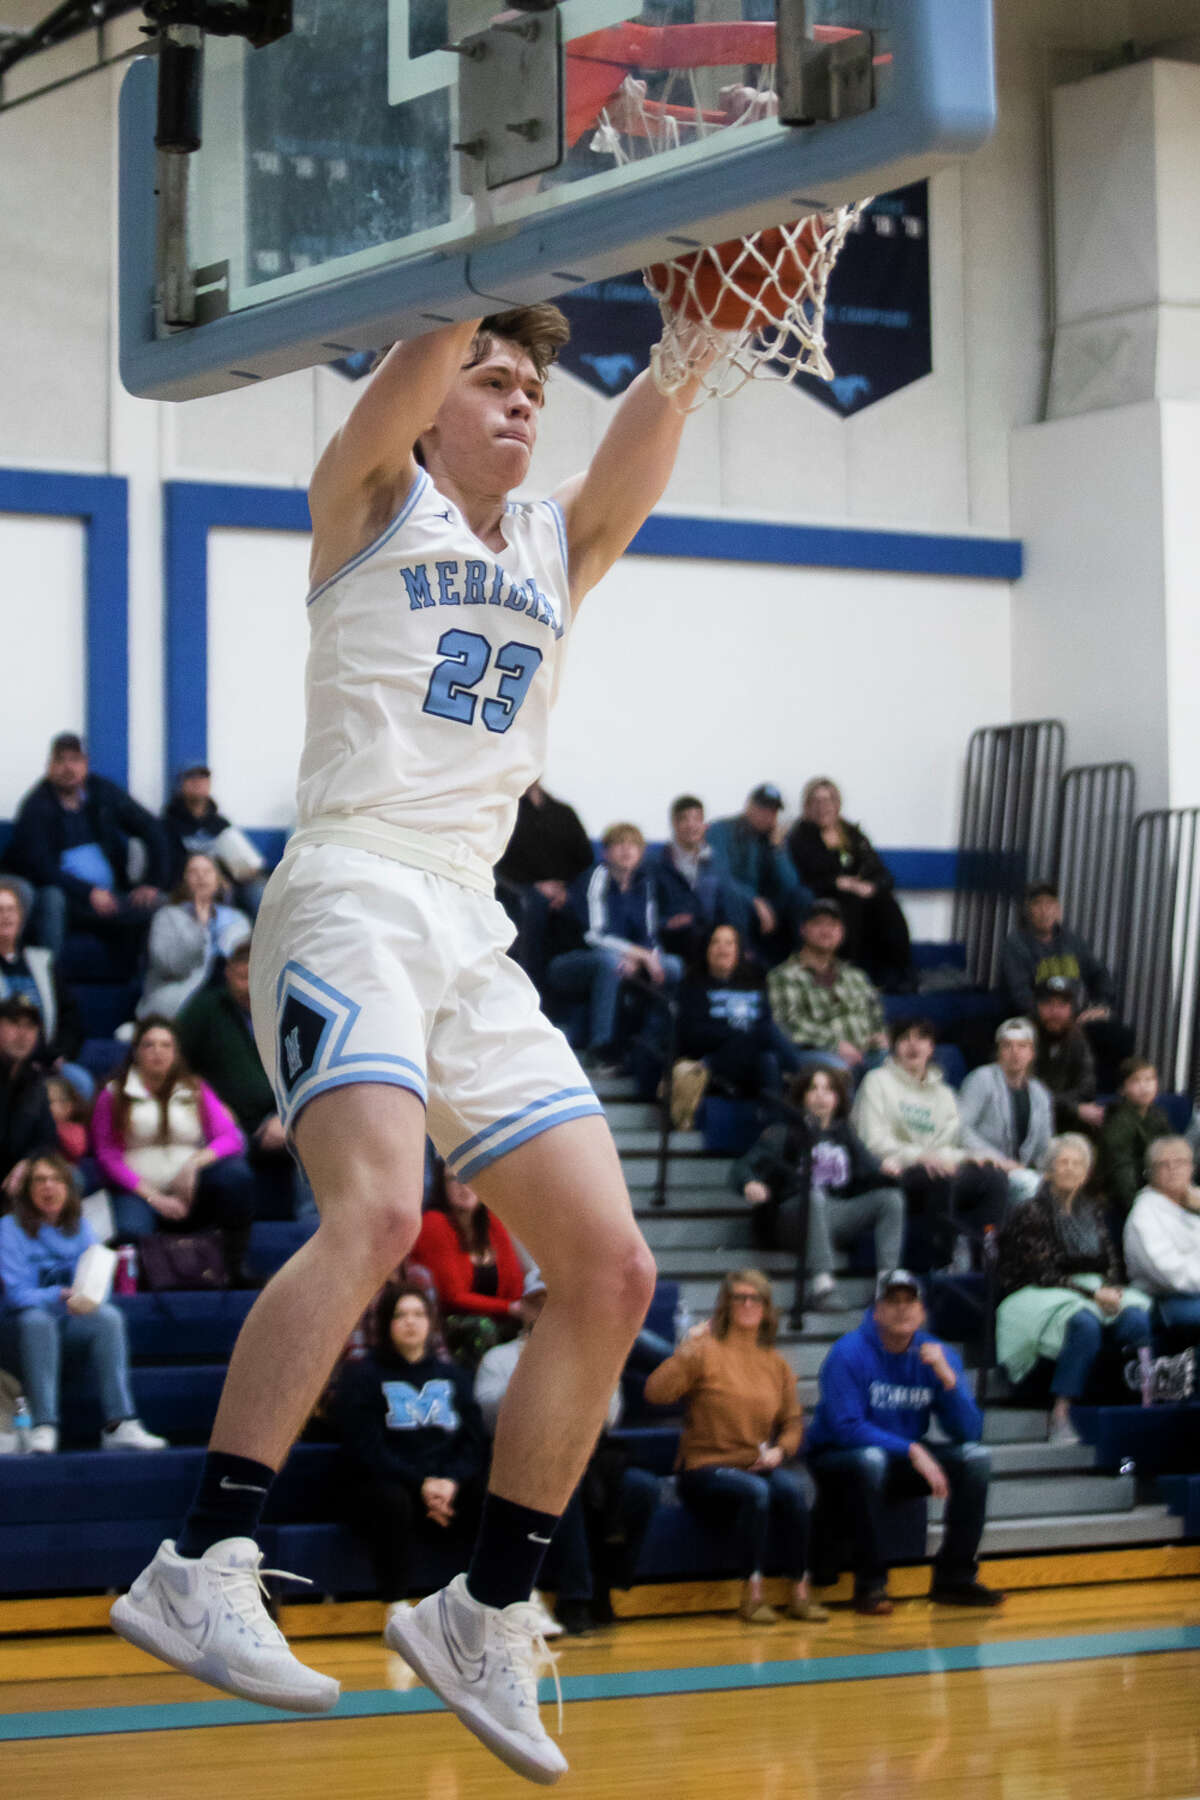 Meridian's Sawyer Moloy dunks the ball during the Mustangs' game against Bullock Creek Tuesday, Dec. 21, 2021 at Meridian Early College High School.